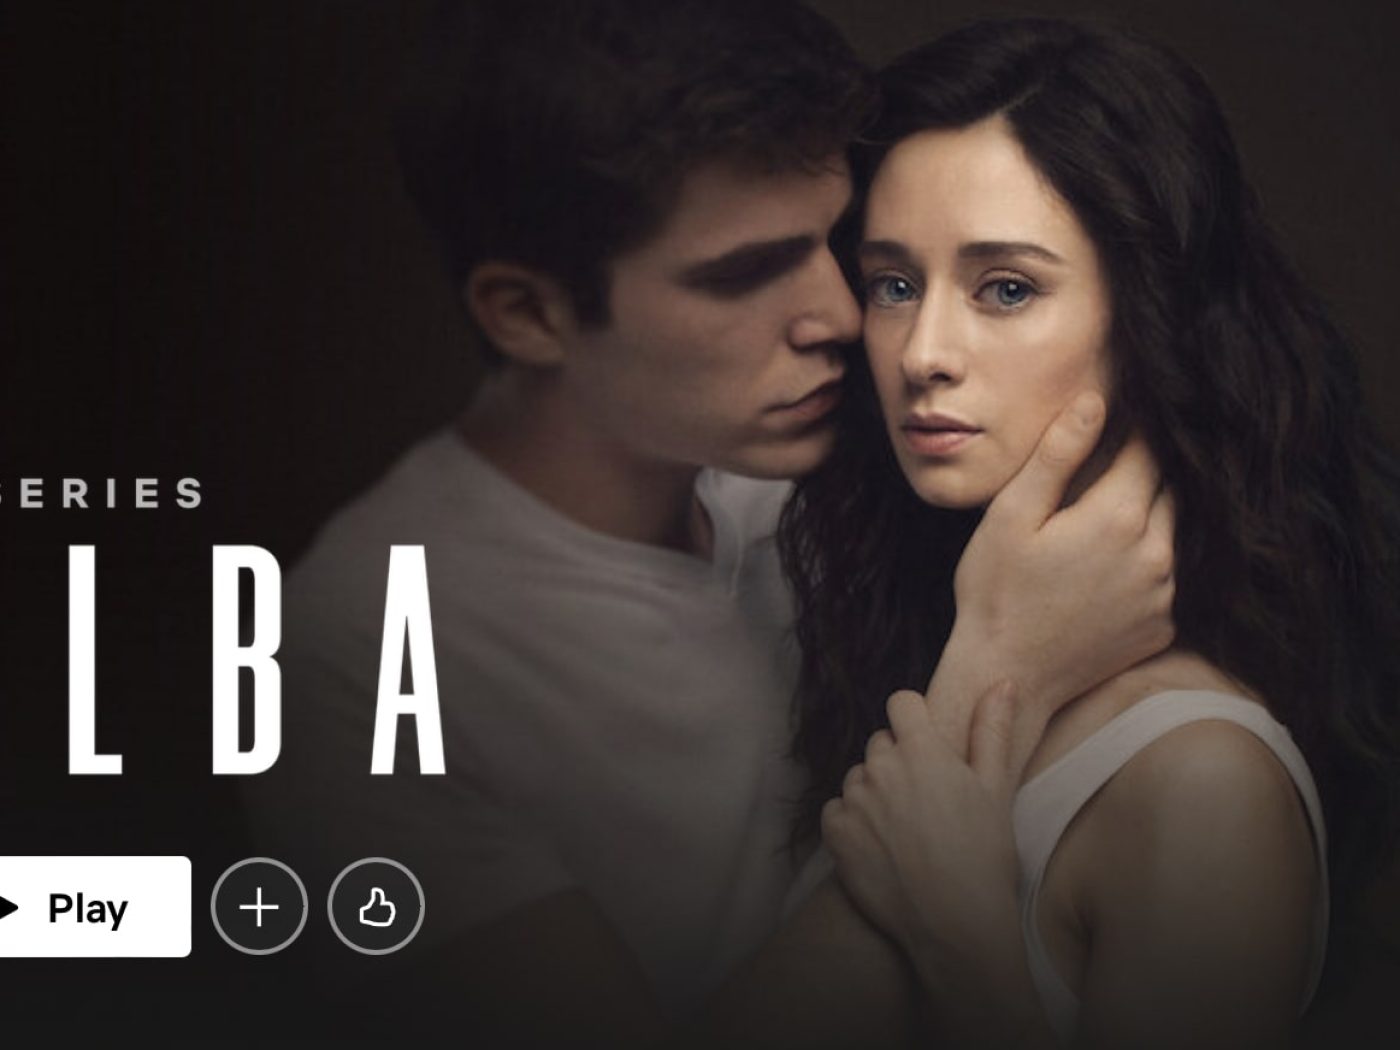 Alba: The brutal new Netflix series that people say is too hard to